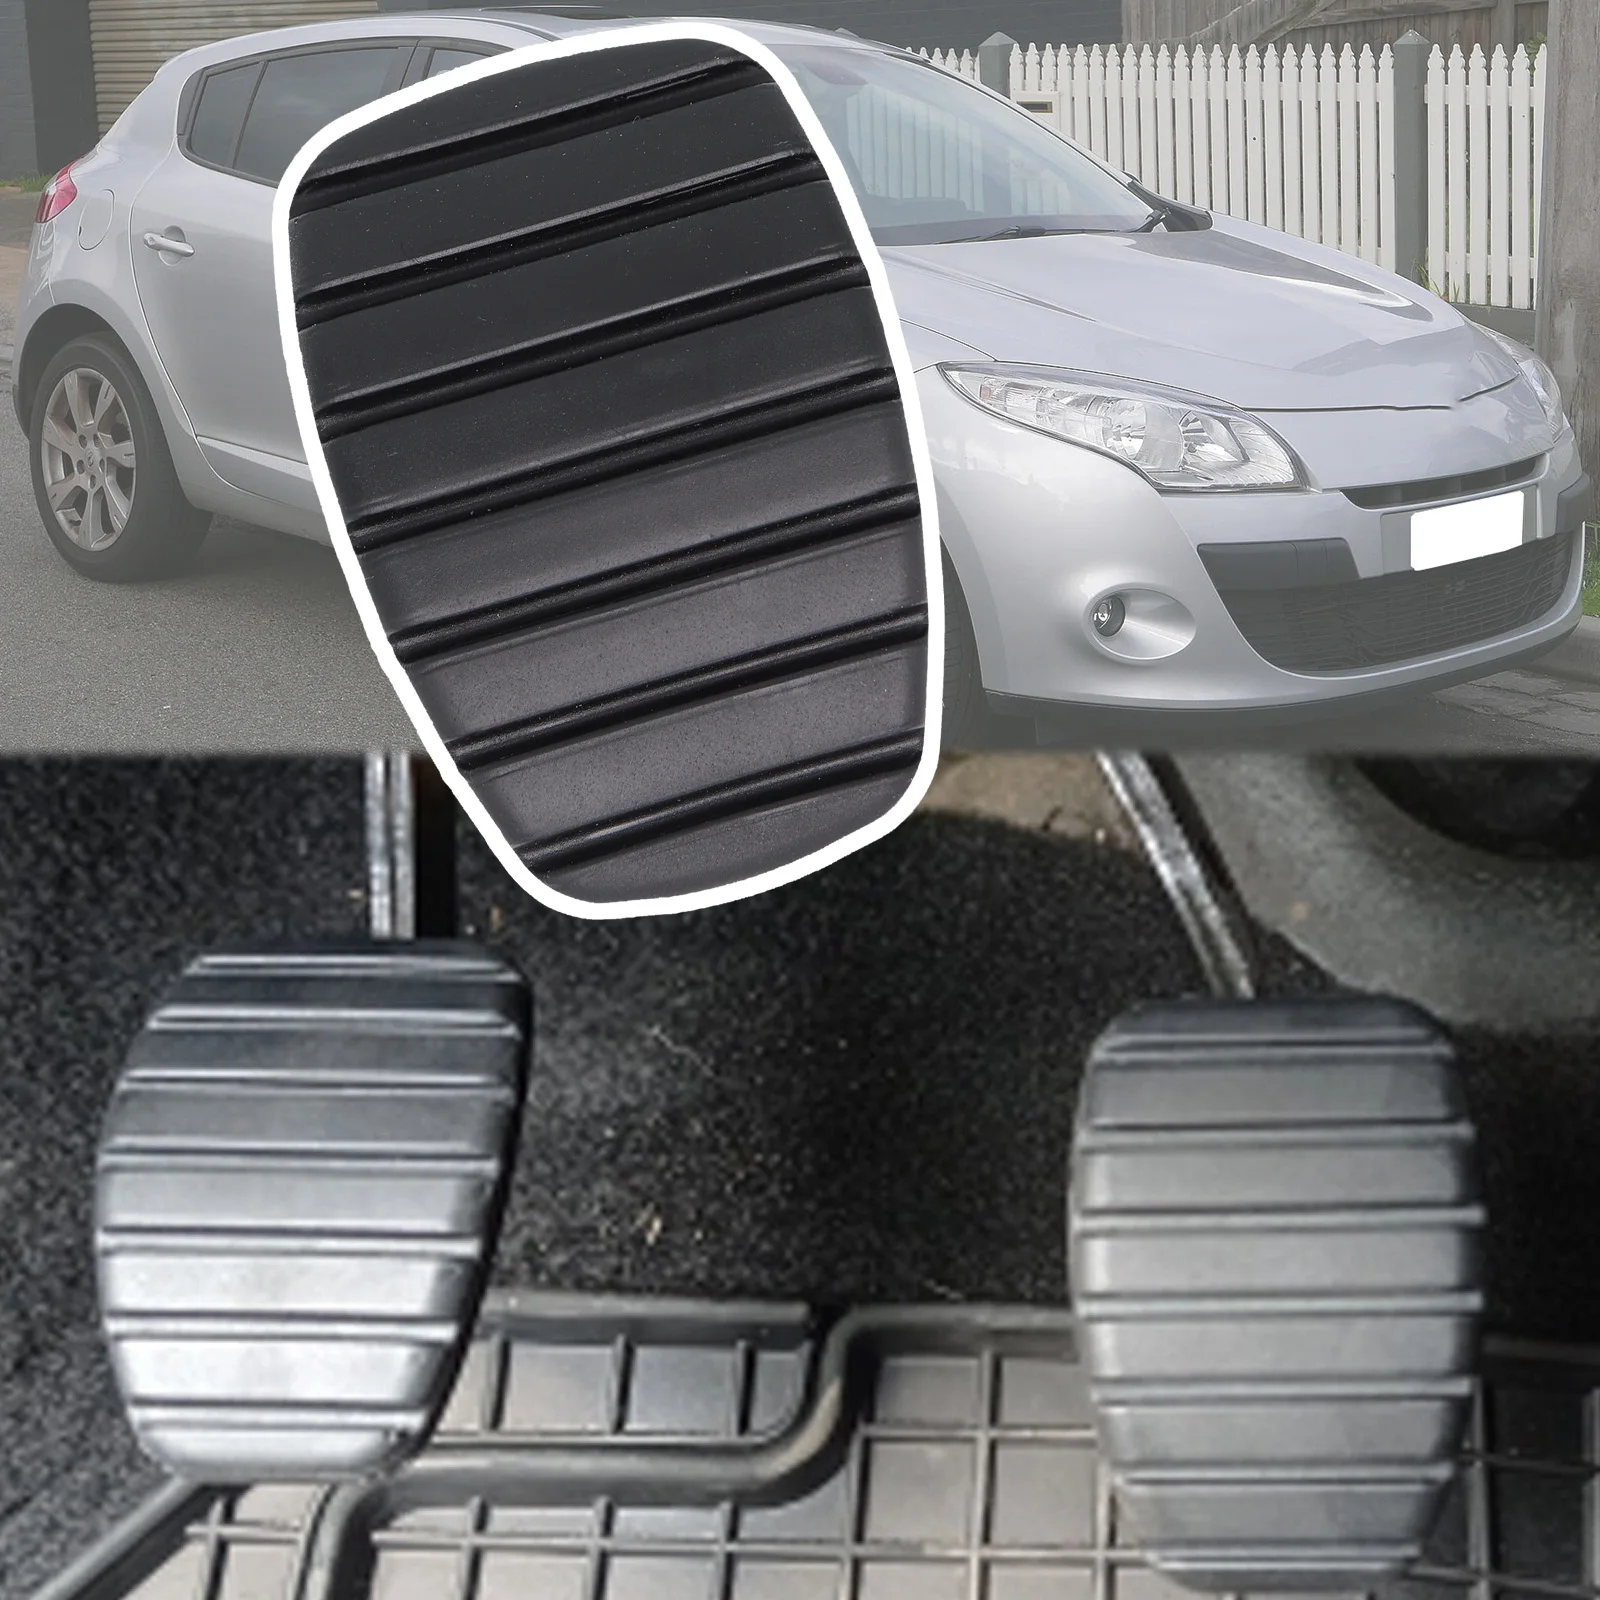 Ubber brake clutch foot pedal pad part covers for renault megane 2 scala 2002 2008 2009 thumb200